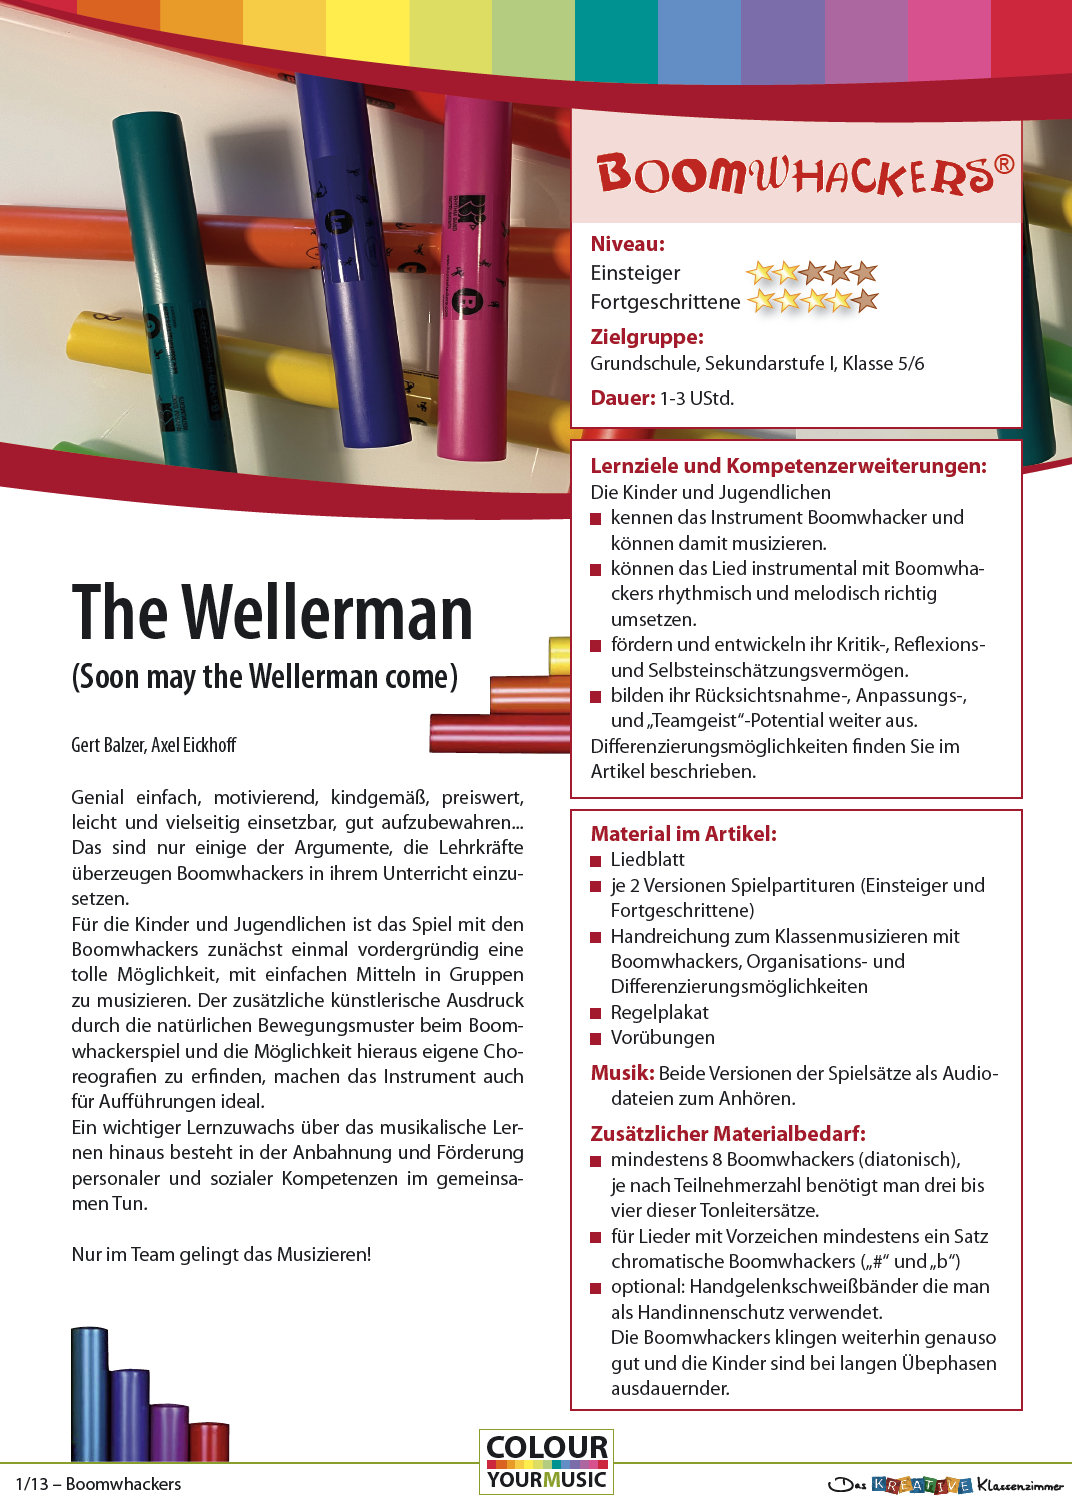 The Wellerman (Soon may the Wellerman come) - Boomwhackers